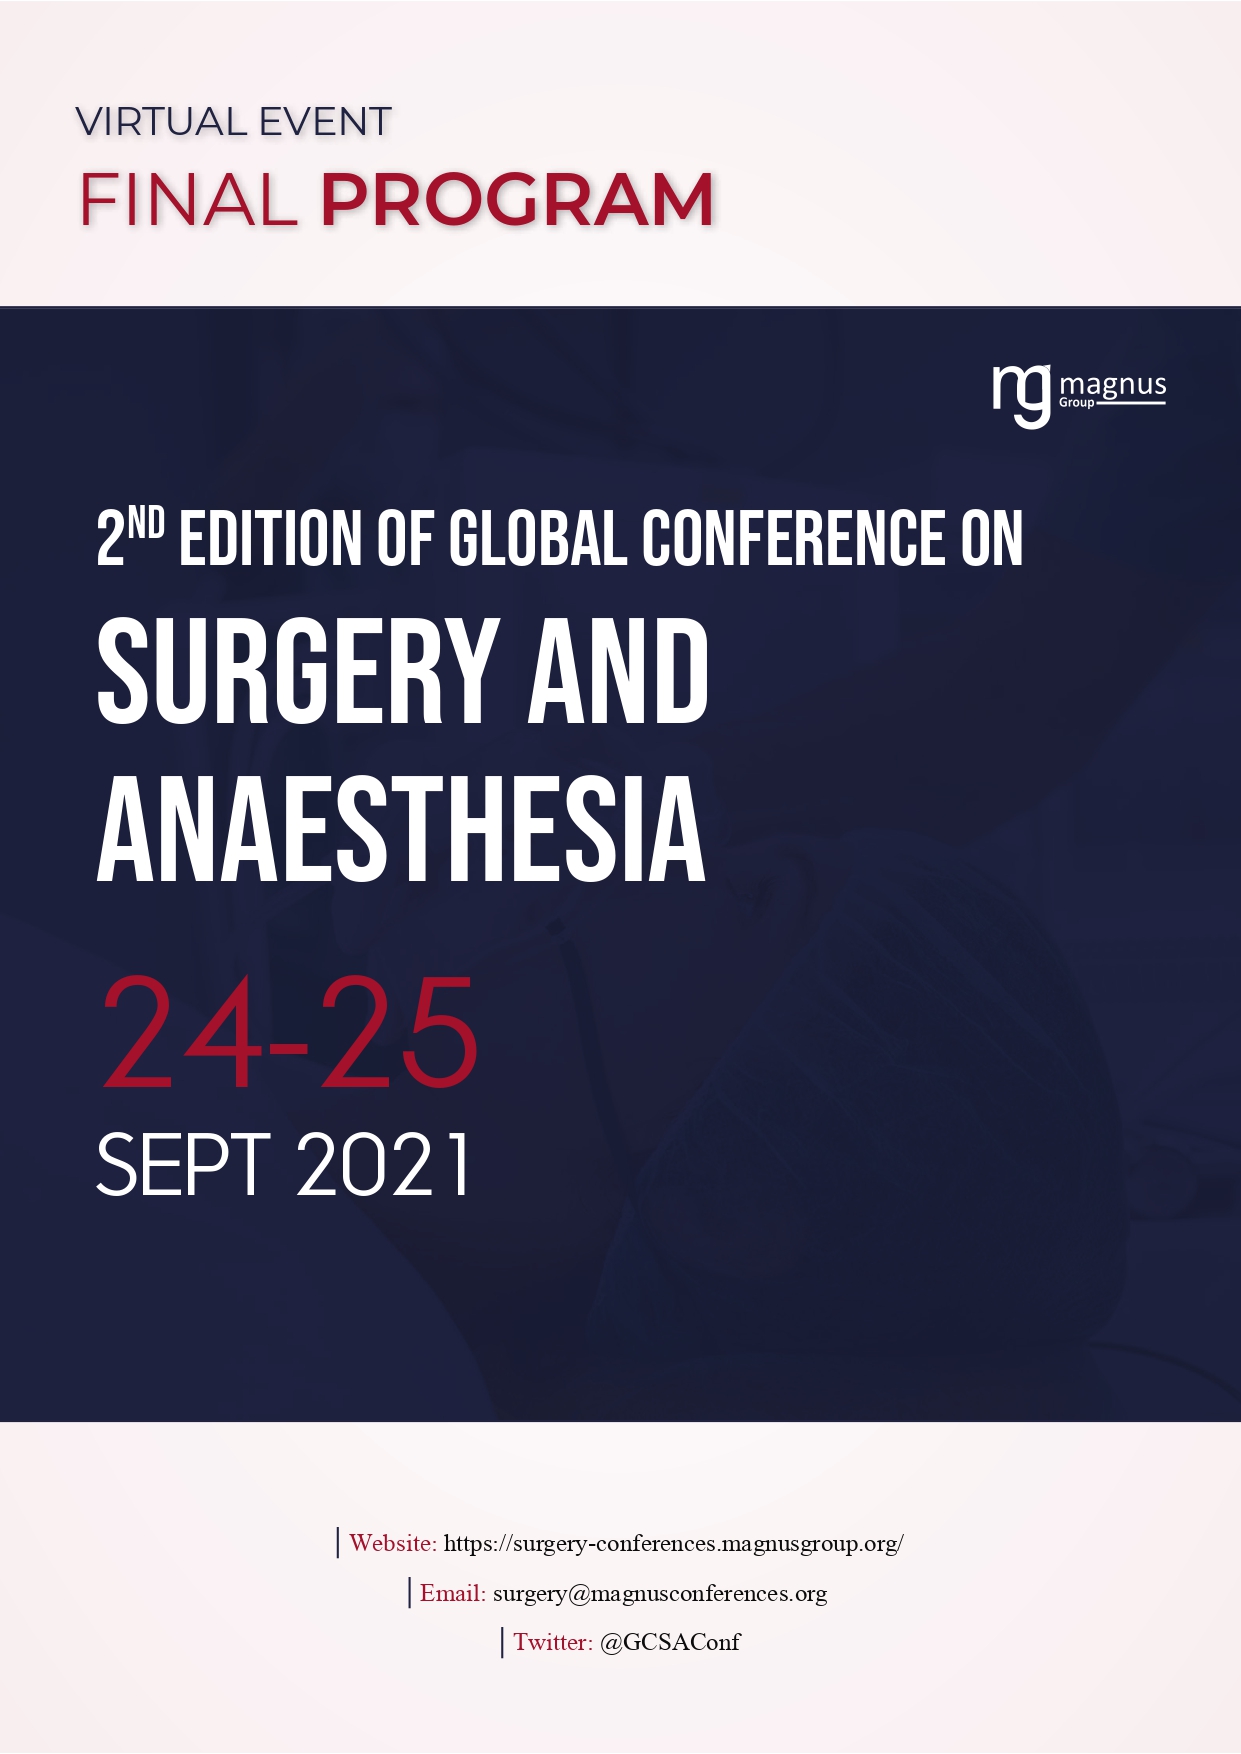 2nd Edition of Global Conference on Surgery and Anesthesia | Online Event Program